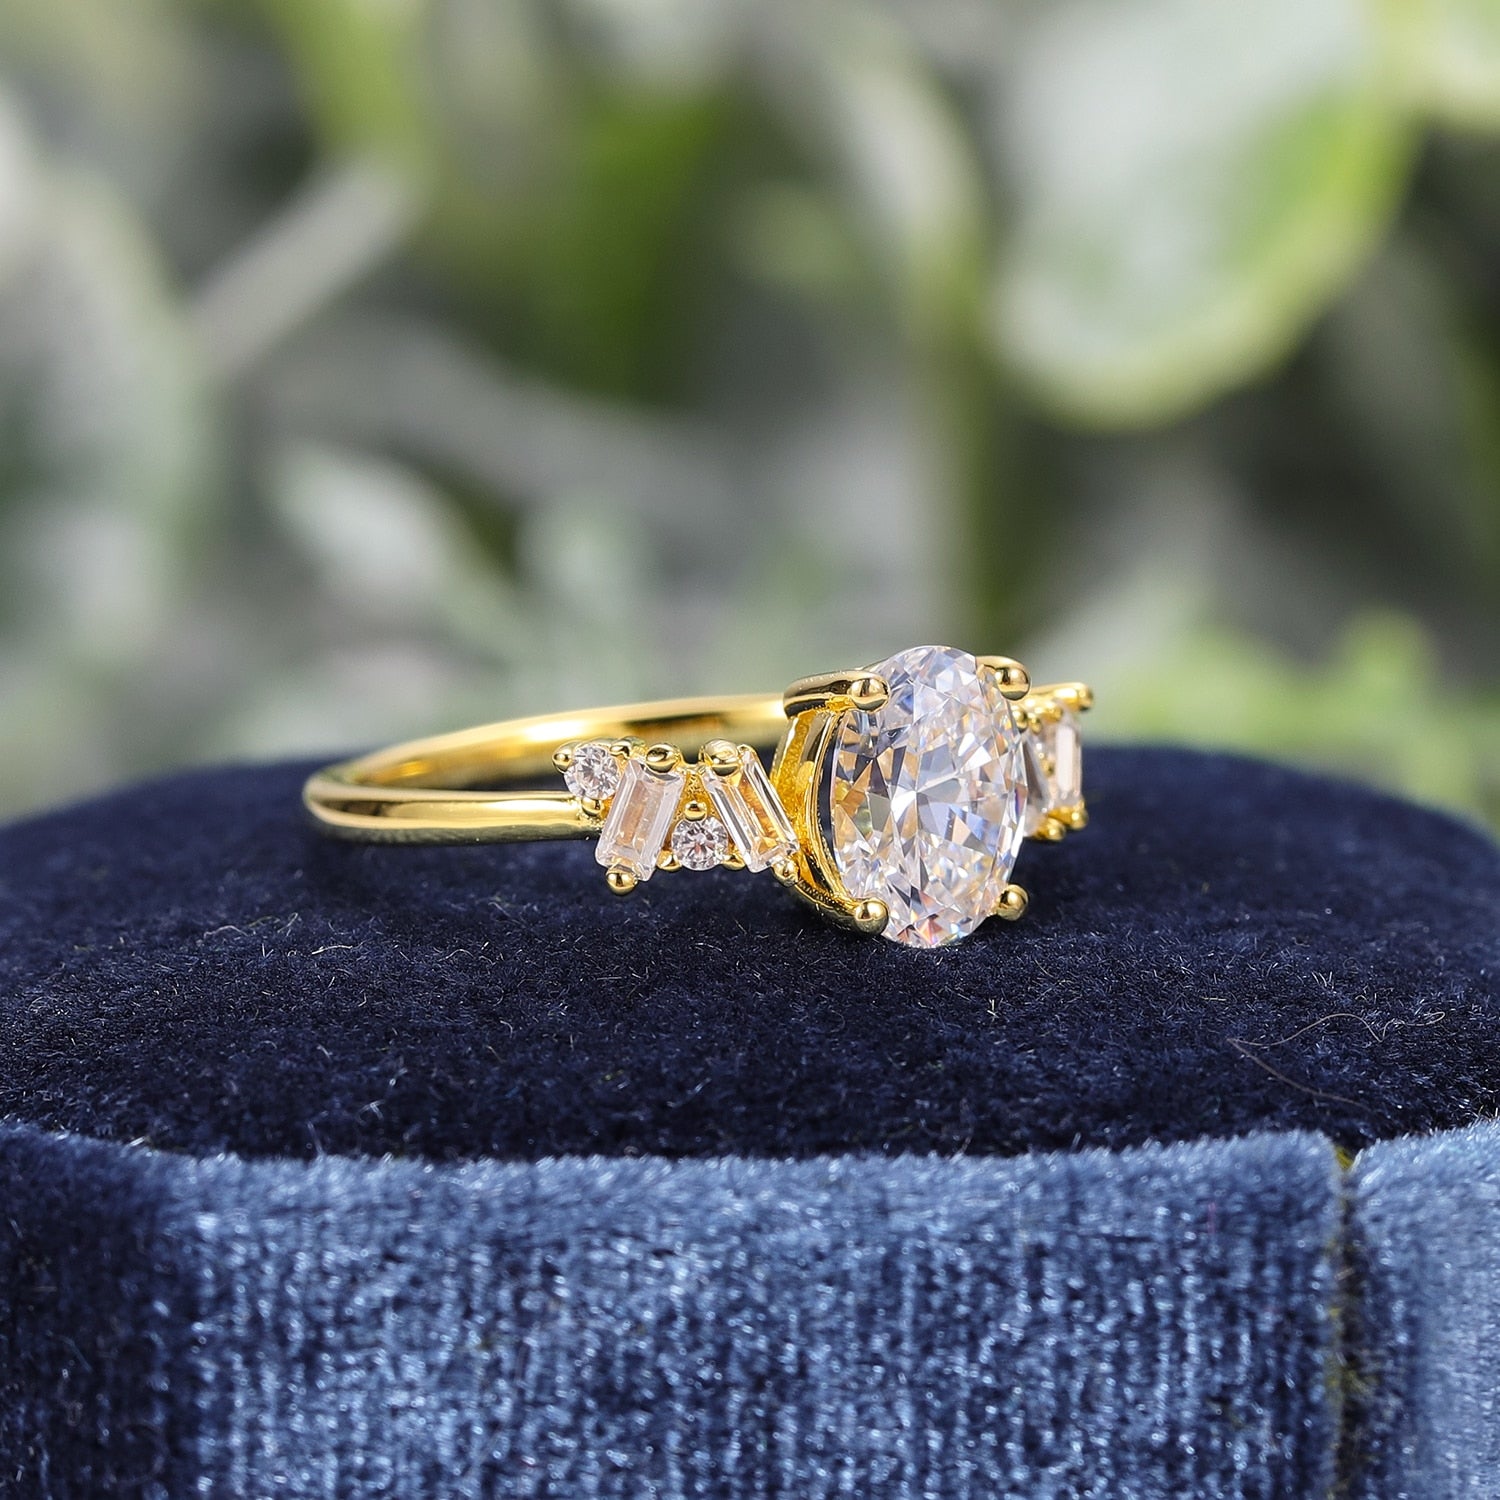 A gold ring set with a oval moissanite and 4 alternating emerald and round clear gems on either side.